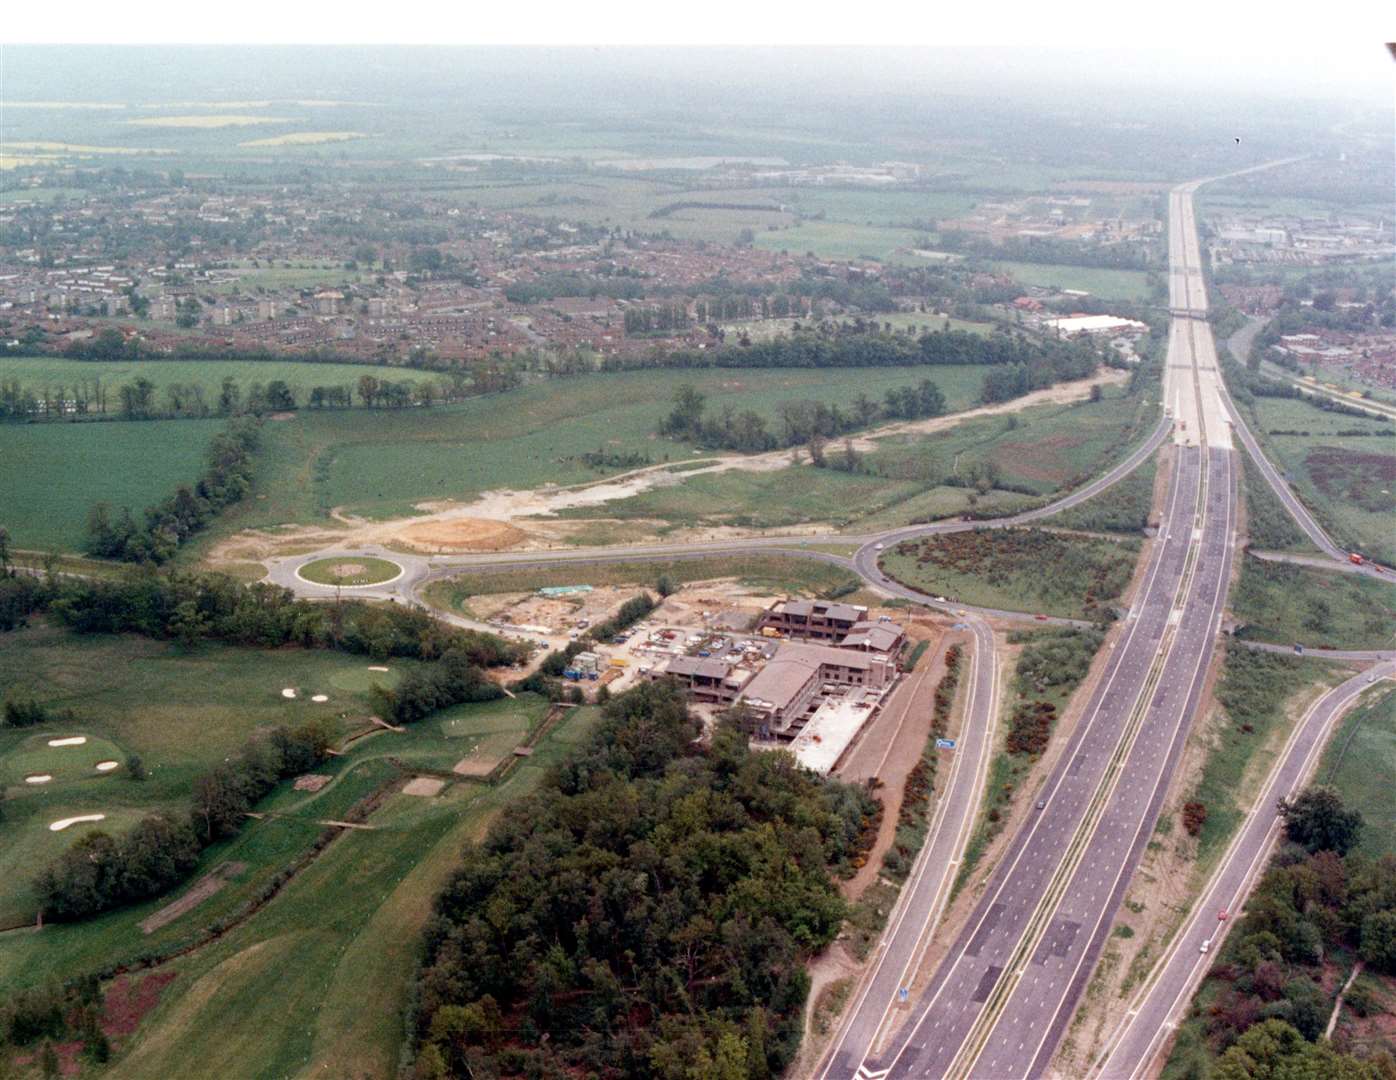 Work on Junction 10 at Ashford of the M20 - the ‘missing link’ connecting the motorway with Maidstone